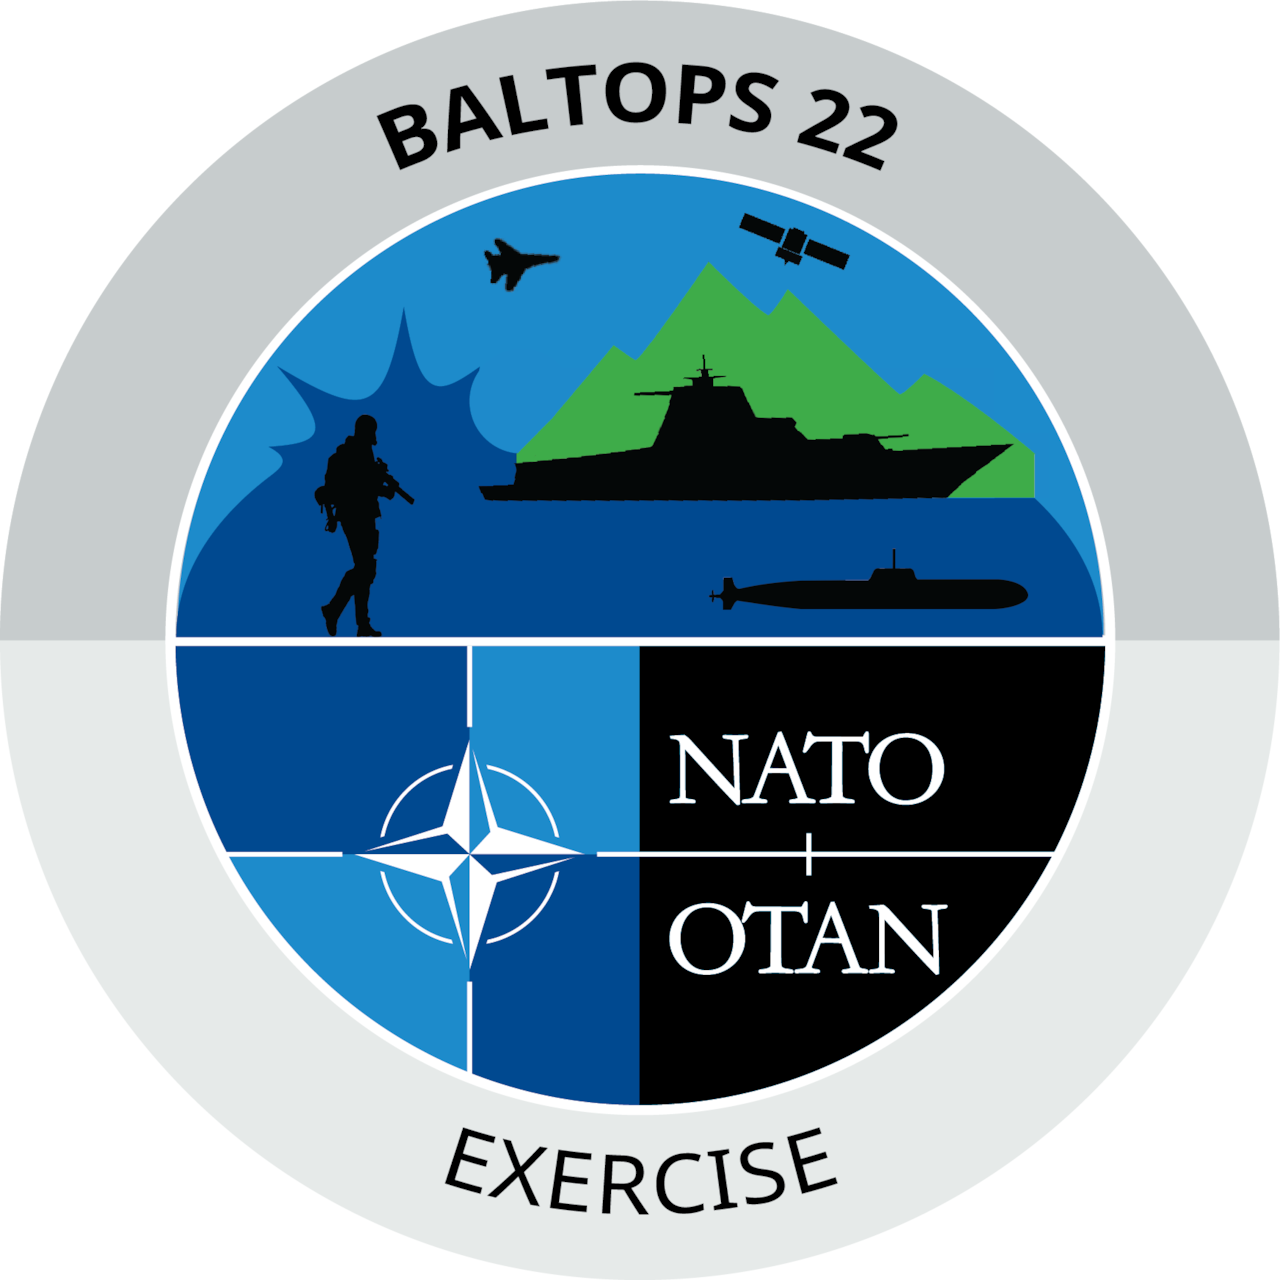 BALTOPS 22 to kick off in June > U.S. Naval Forces Europe and Africa